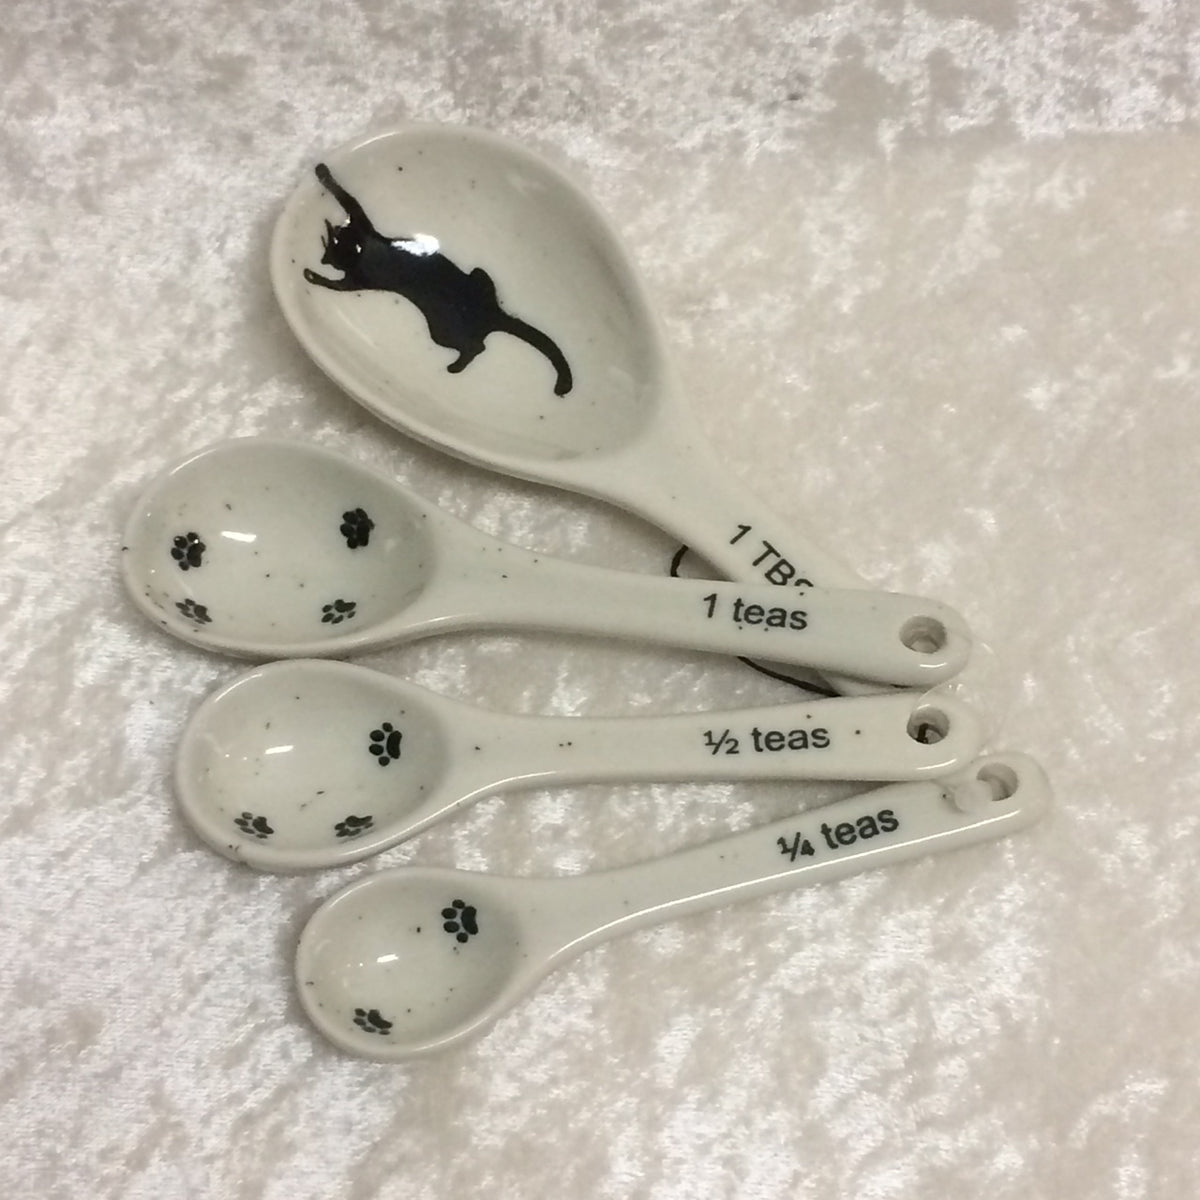 Dragonfly Measuring Spoons